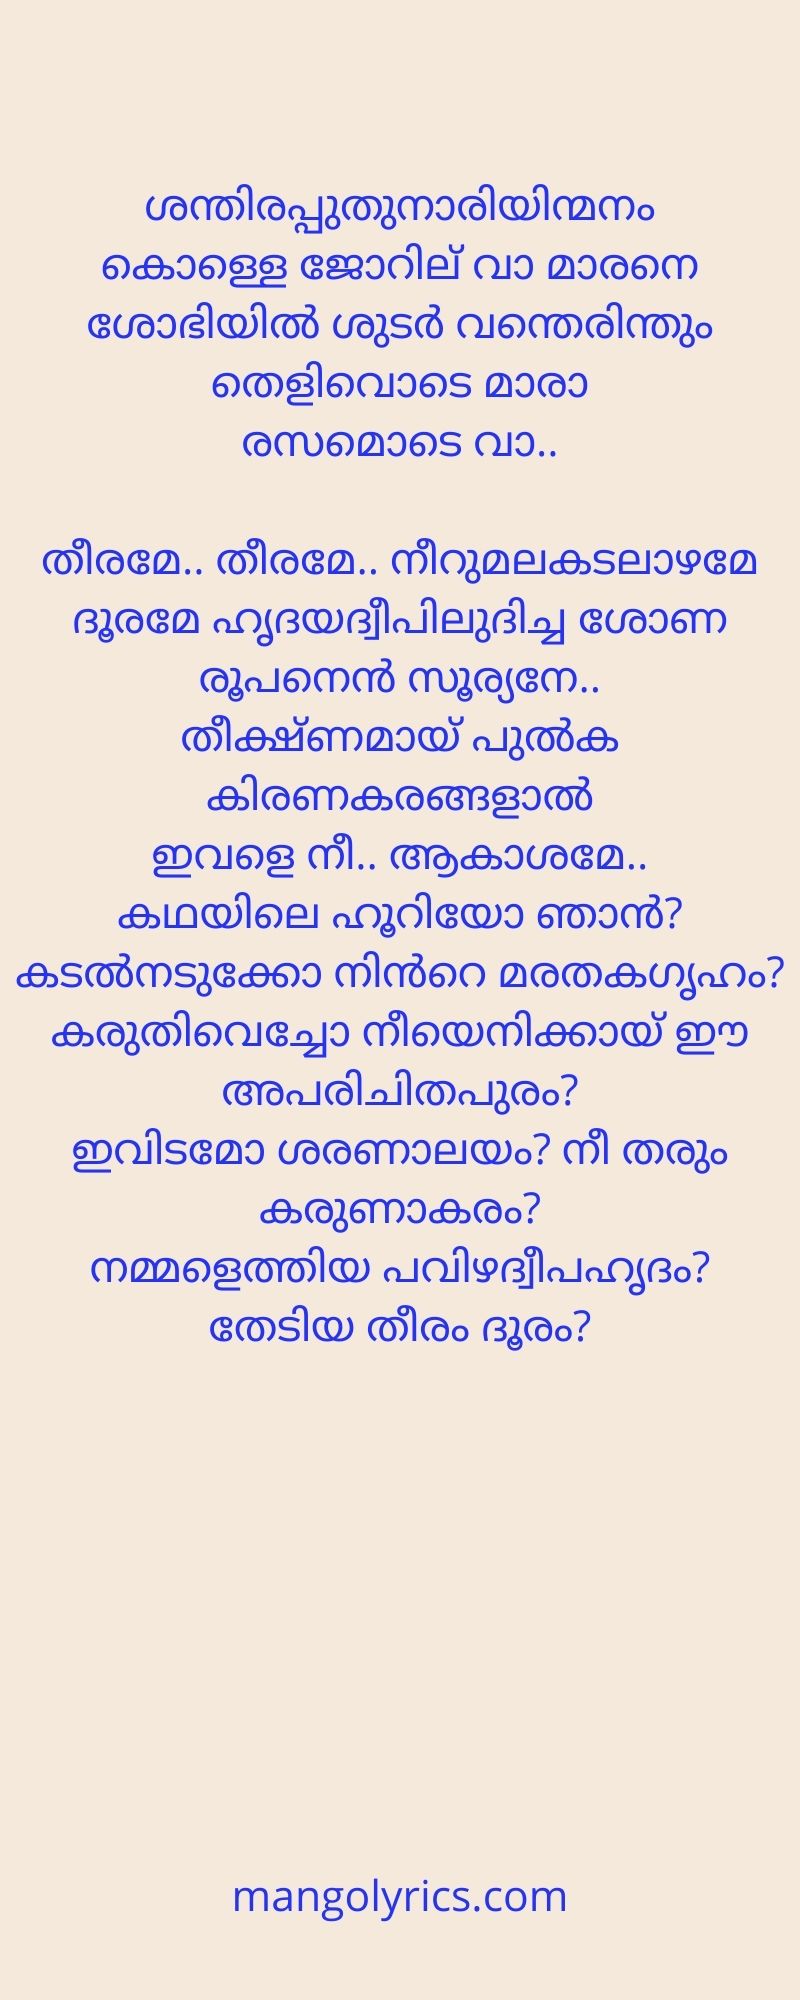 Theerame Theerame Lyrics from the Malayalam film 'MALIK'. Penned by Anwar Ali, music composed by Sushin Shyam, and sung by KS Chitra & Sooraj Santosh.